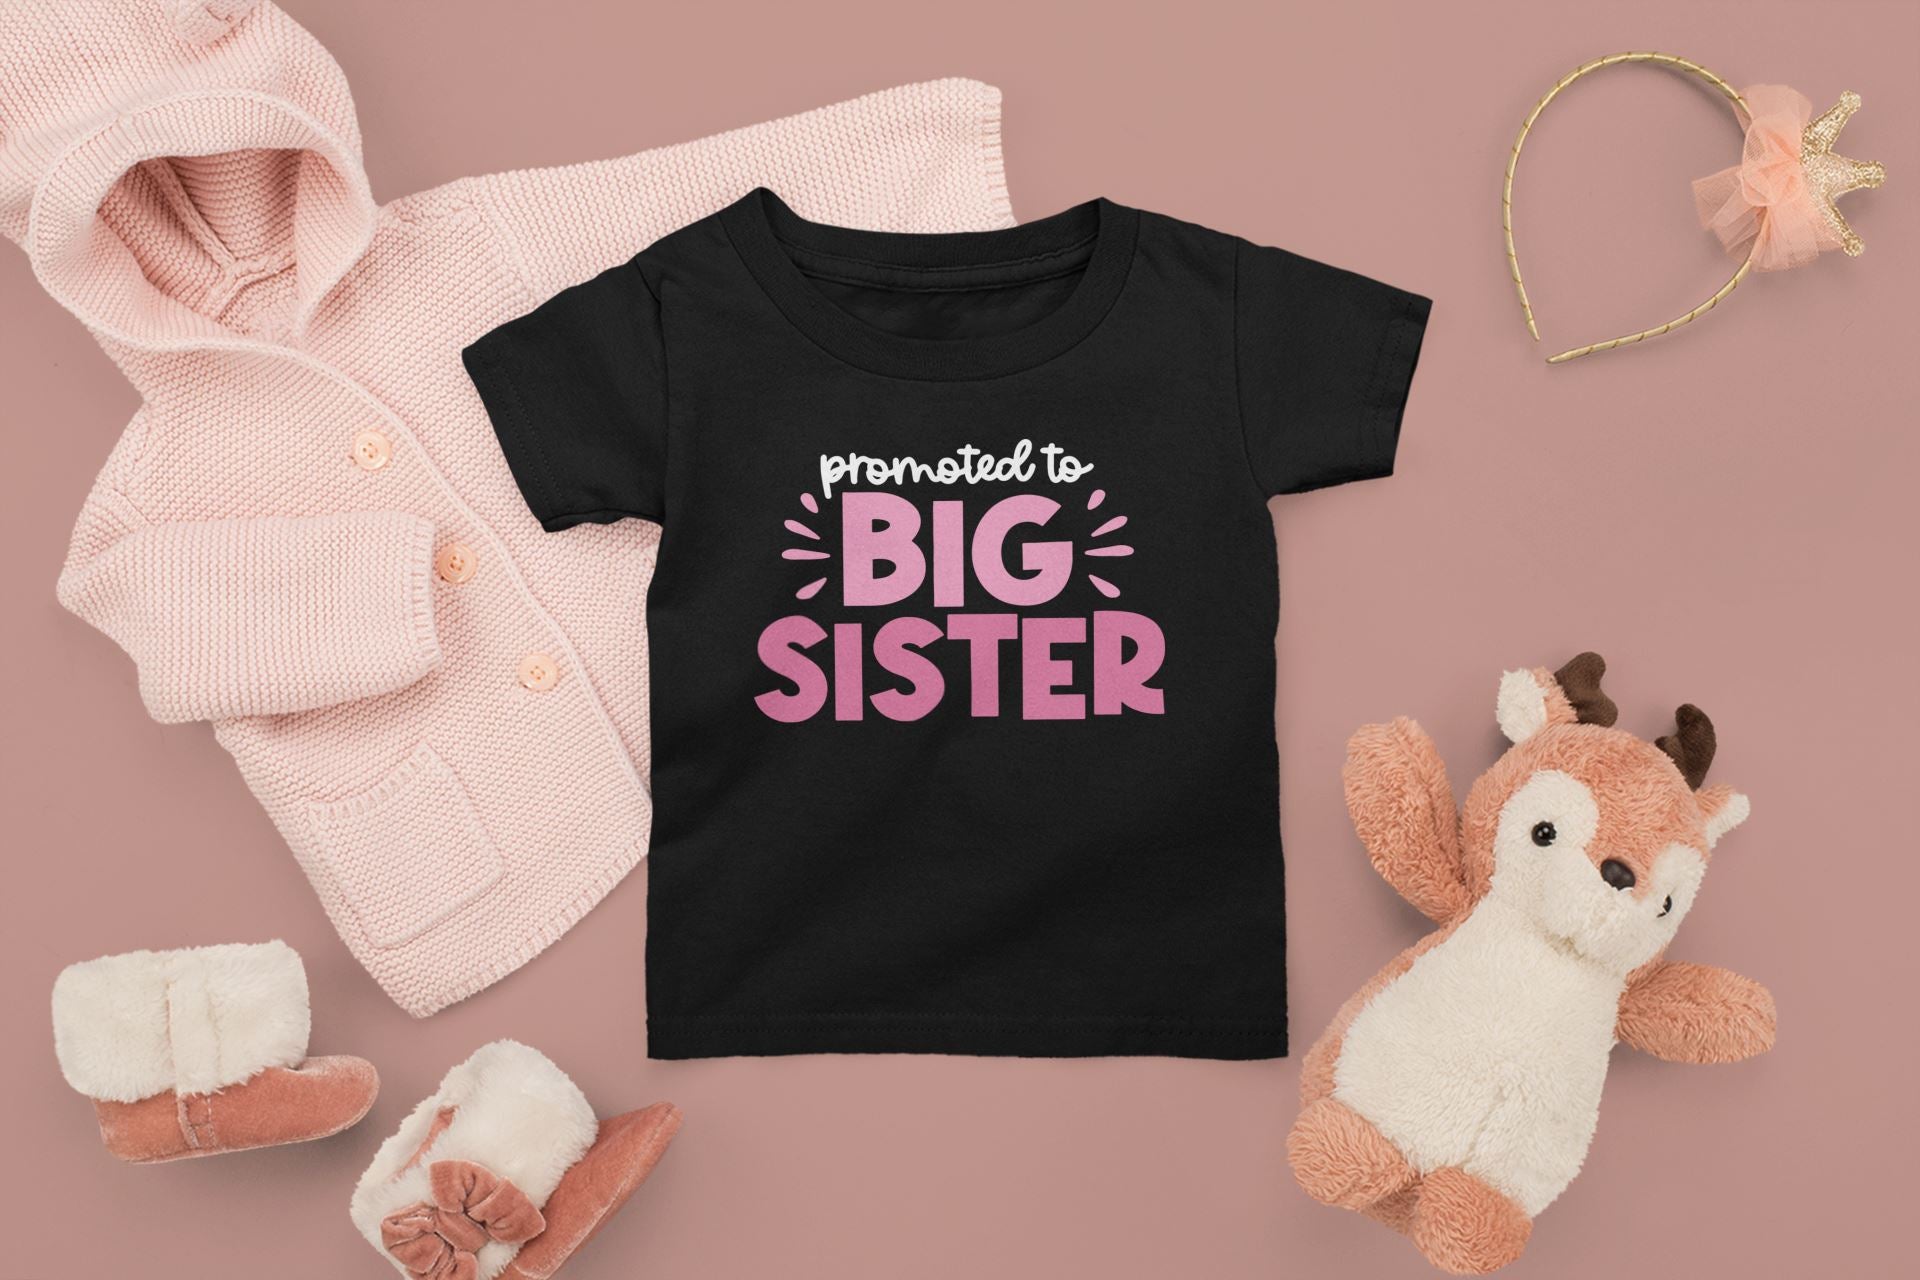 Promoted to Big Sister Big Brother T-shirts